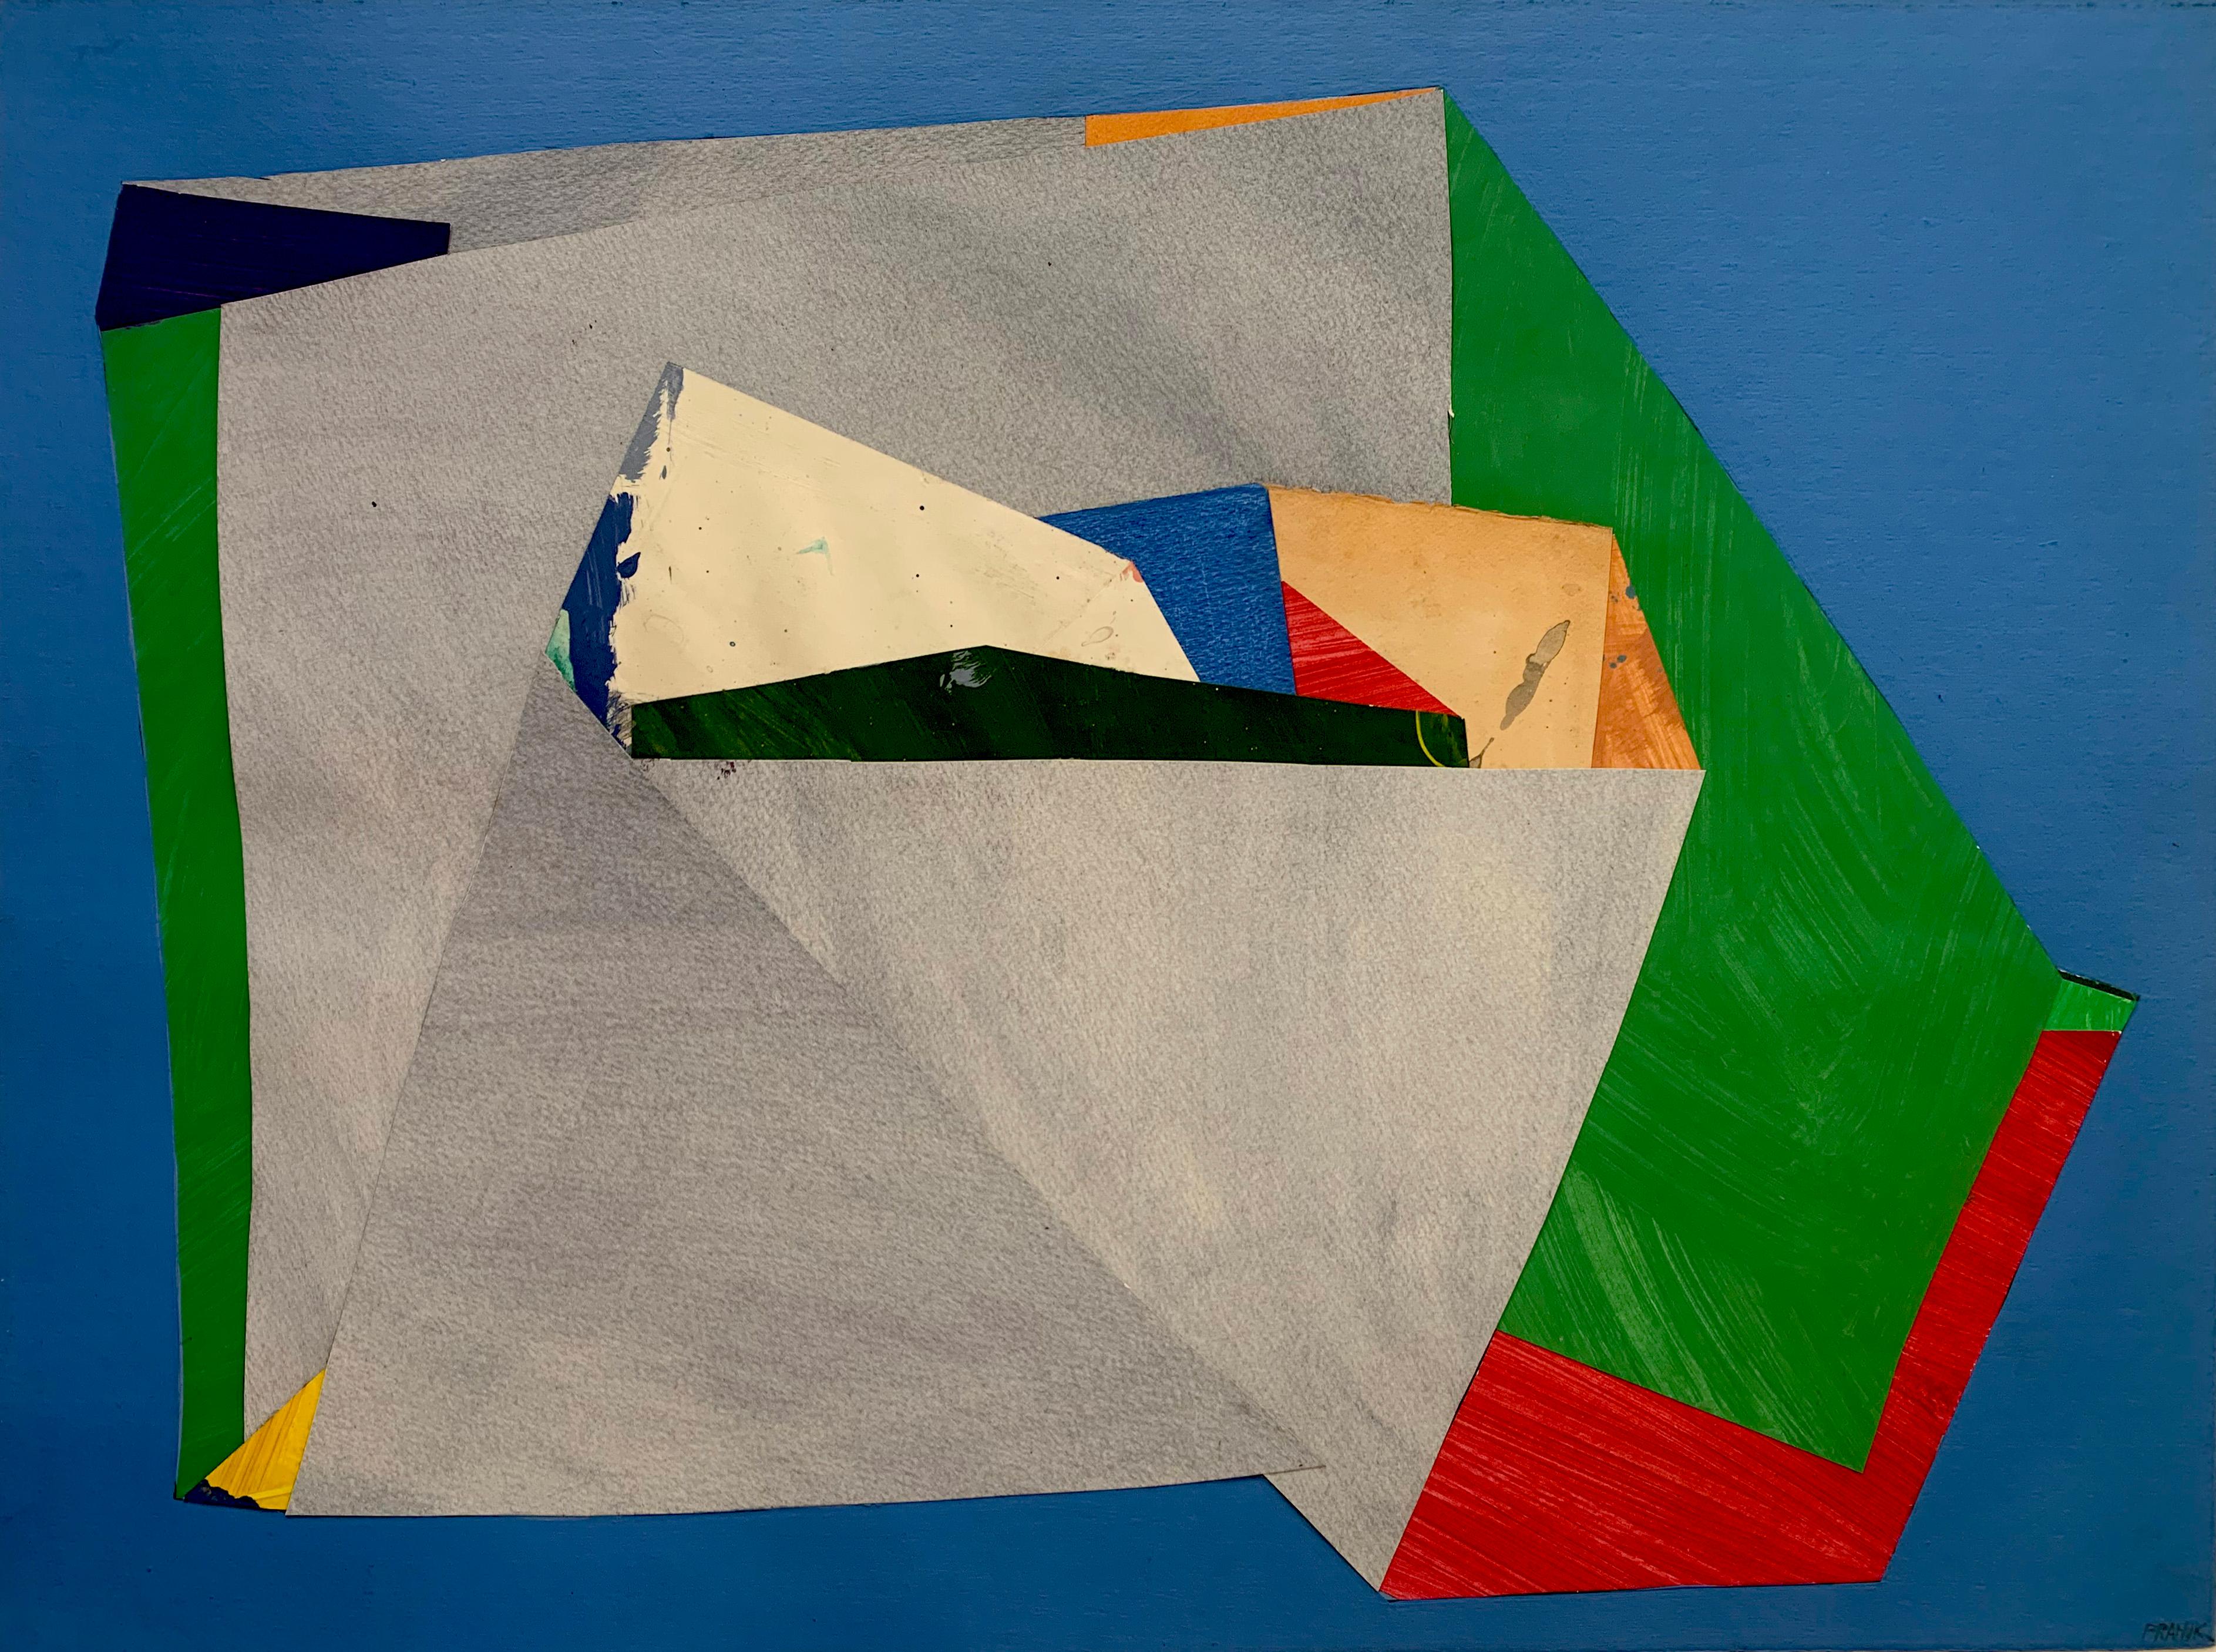 Edward Pramuk Abstract Painting - "Holding Pattern" 1975, Mixed Media and Rag Paper Collage on Paper, Abstract